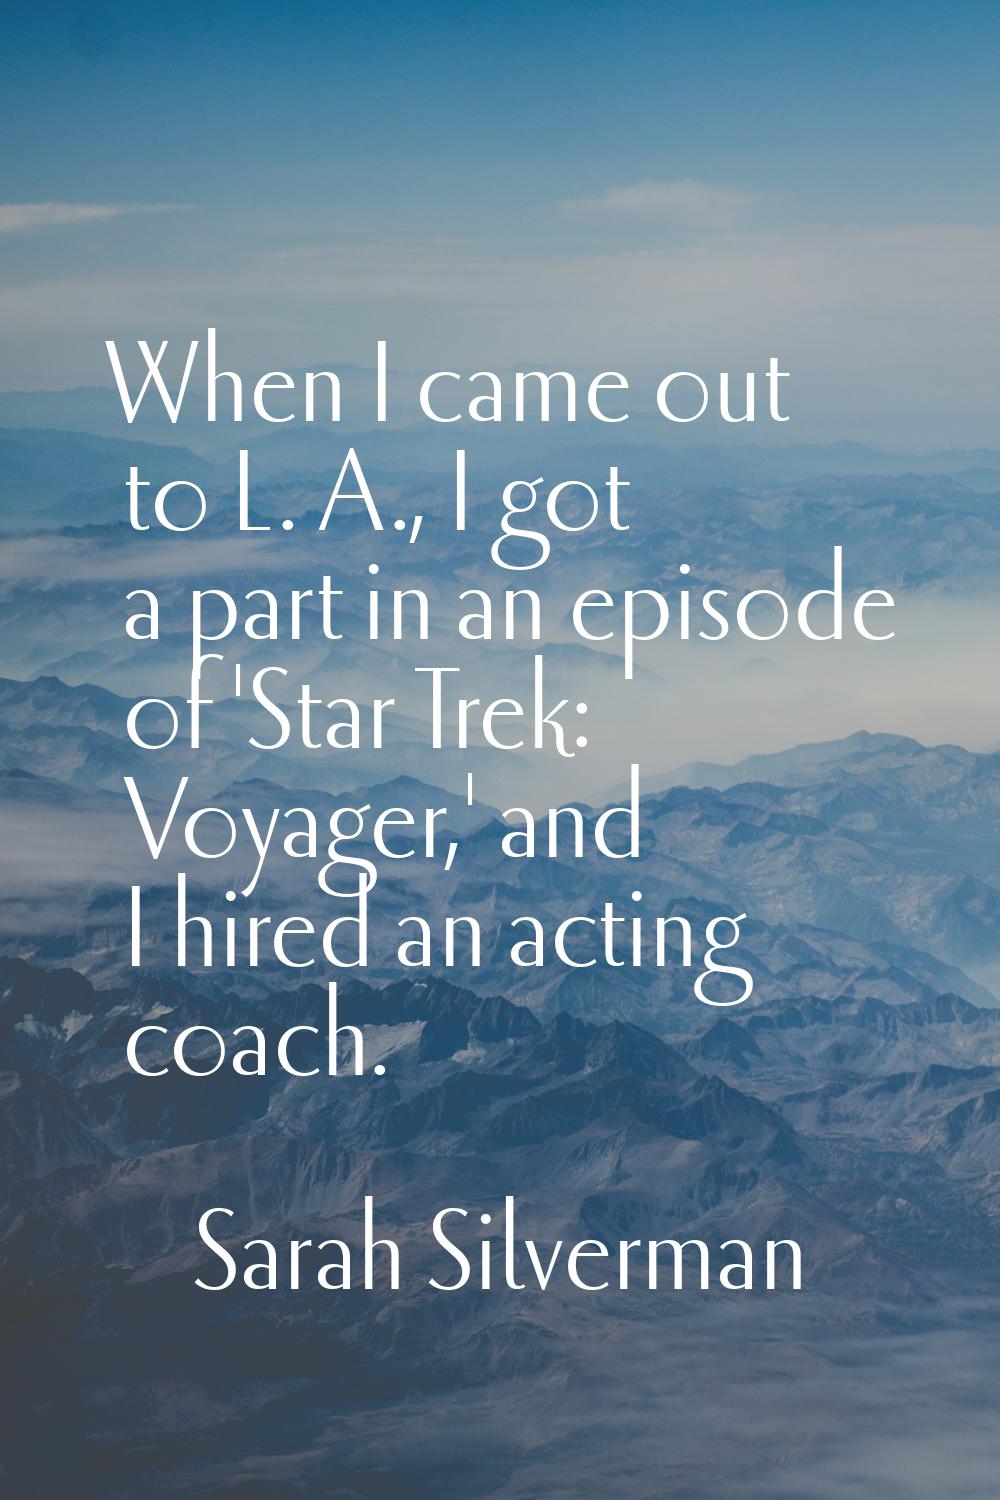 When I came out to L. A., I got a part in an episode of 'Star Trek: Voyager,' and I hired an acting